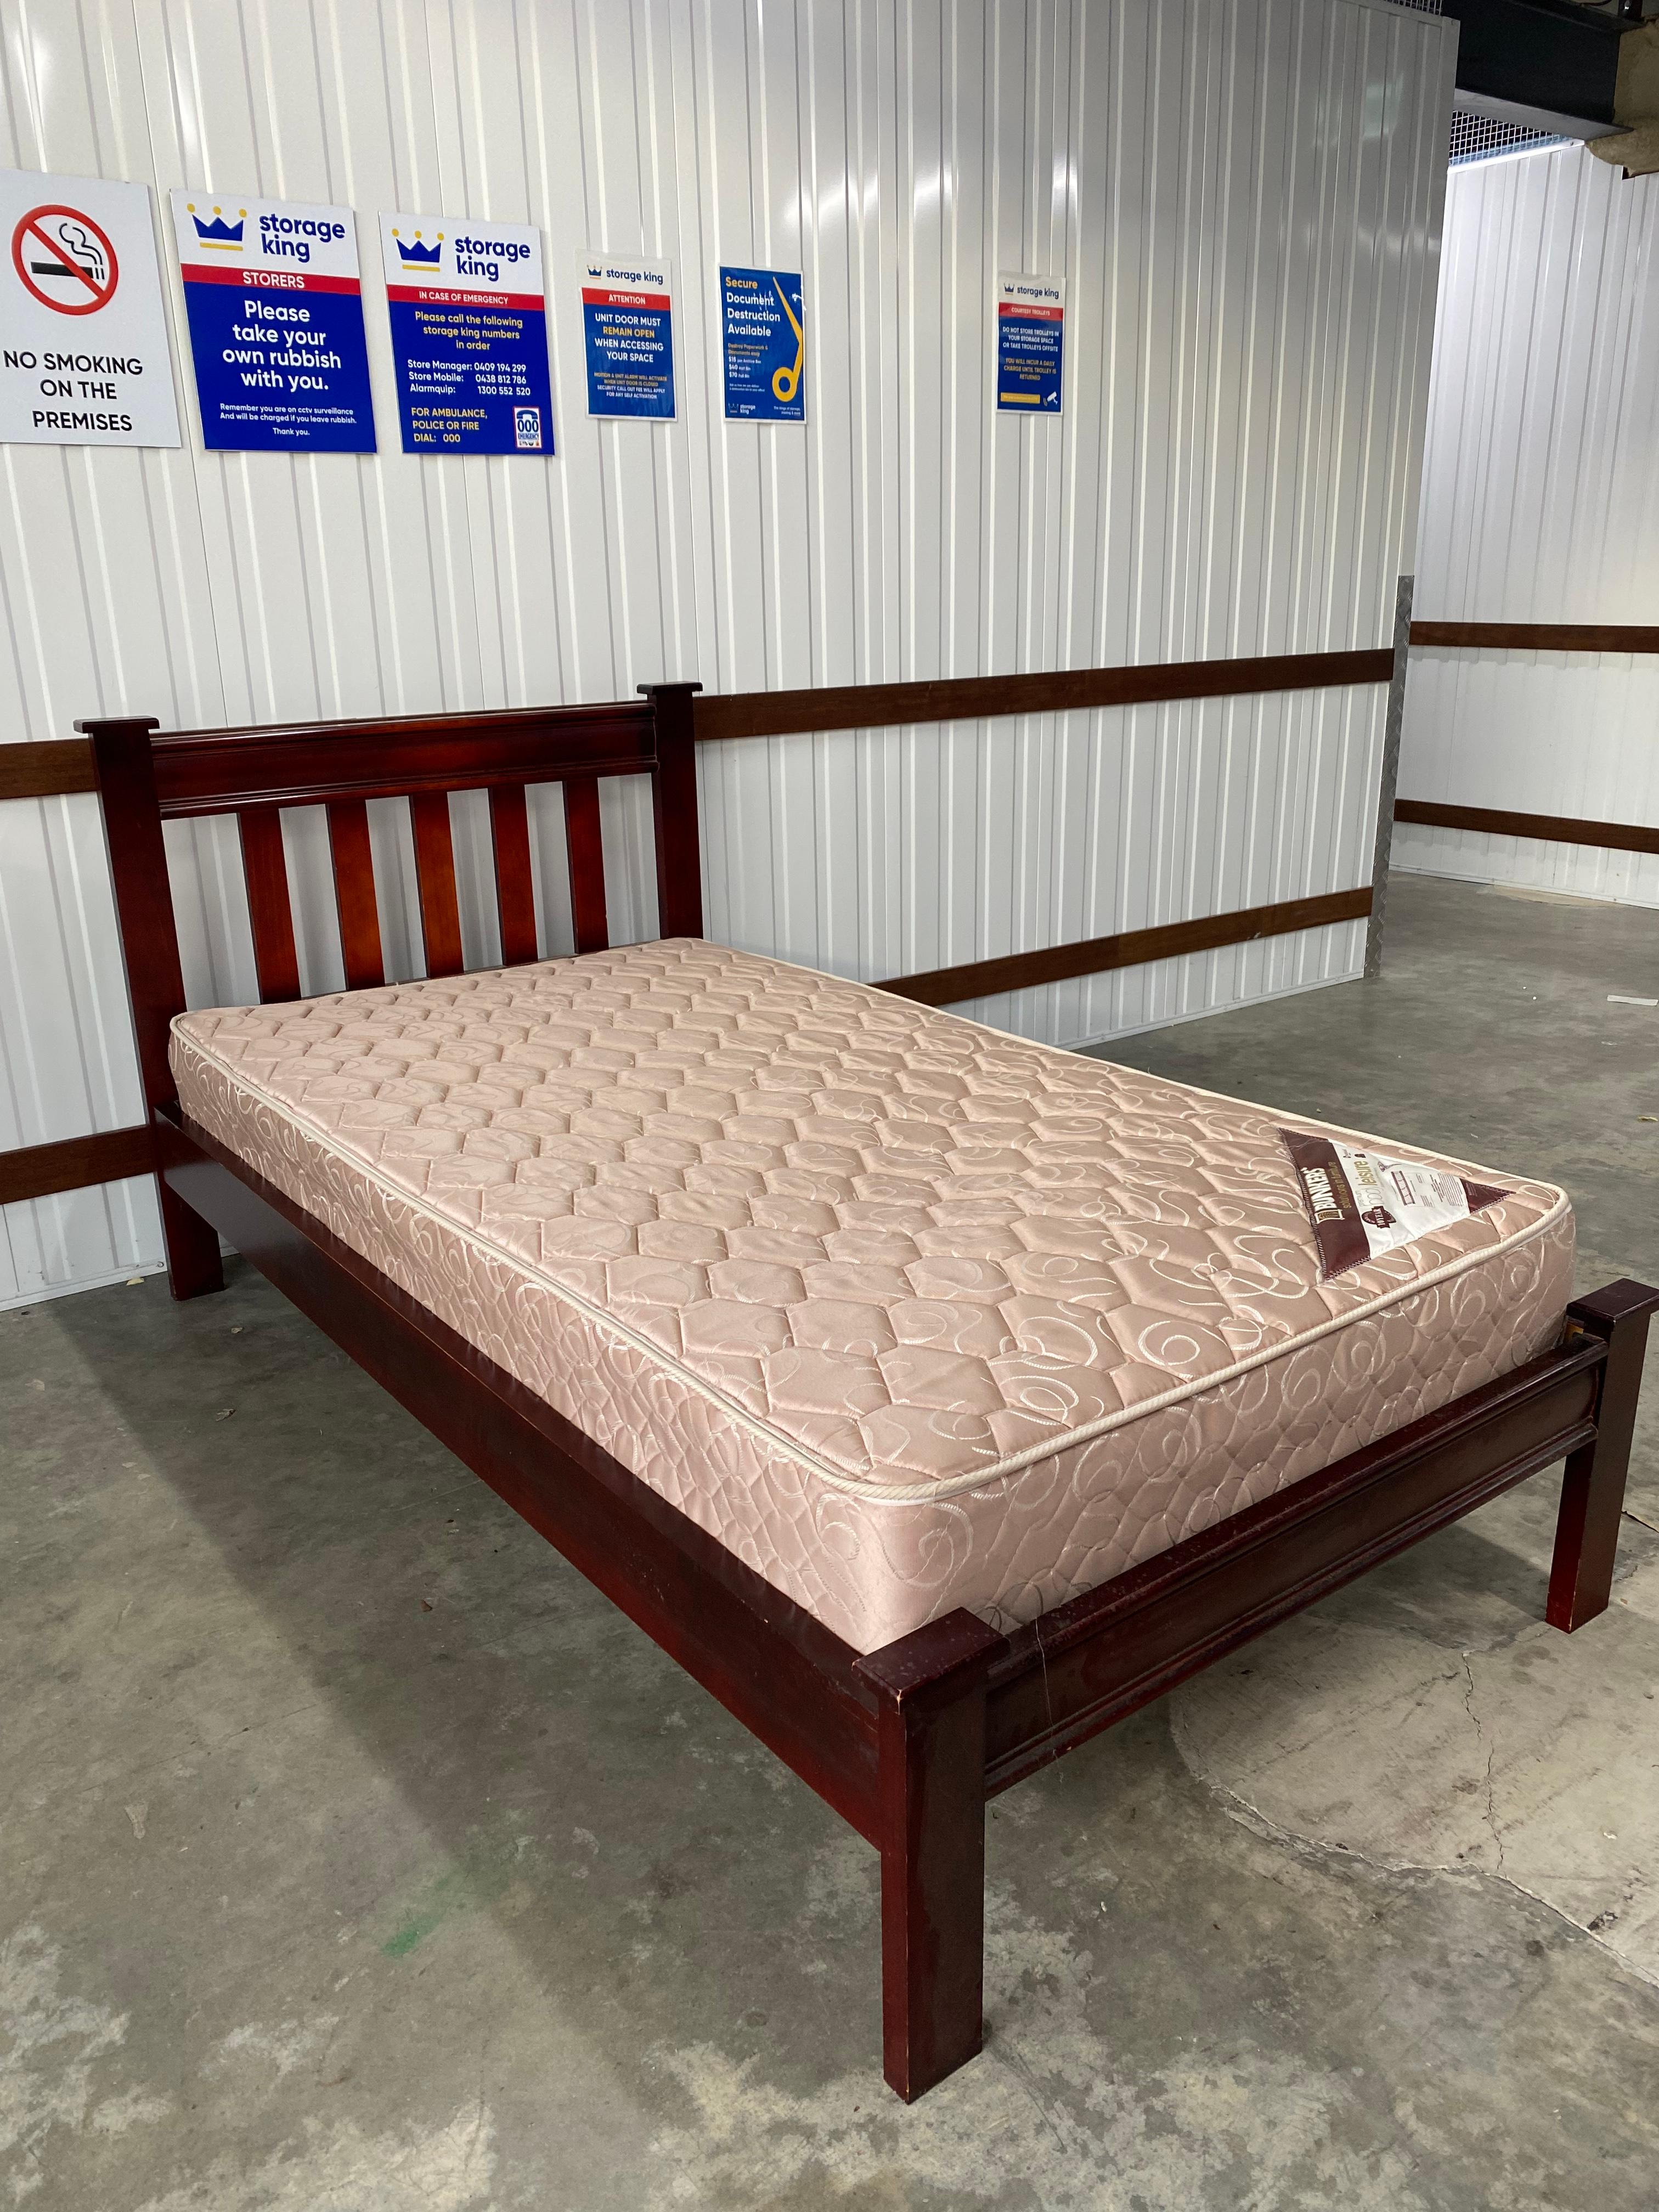 King Single Bed Frame and Pink Mattress